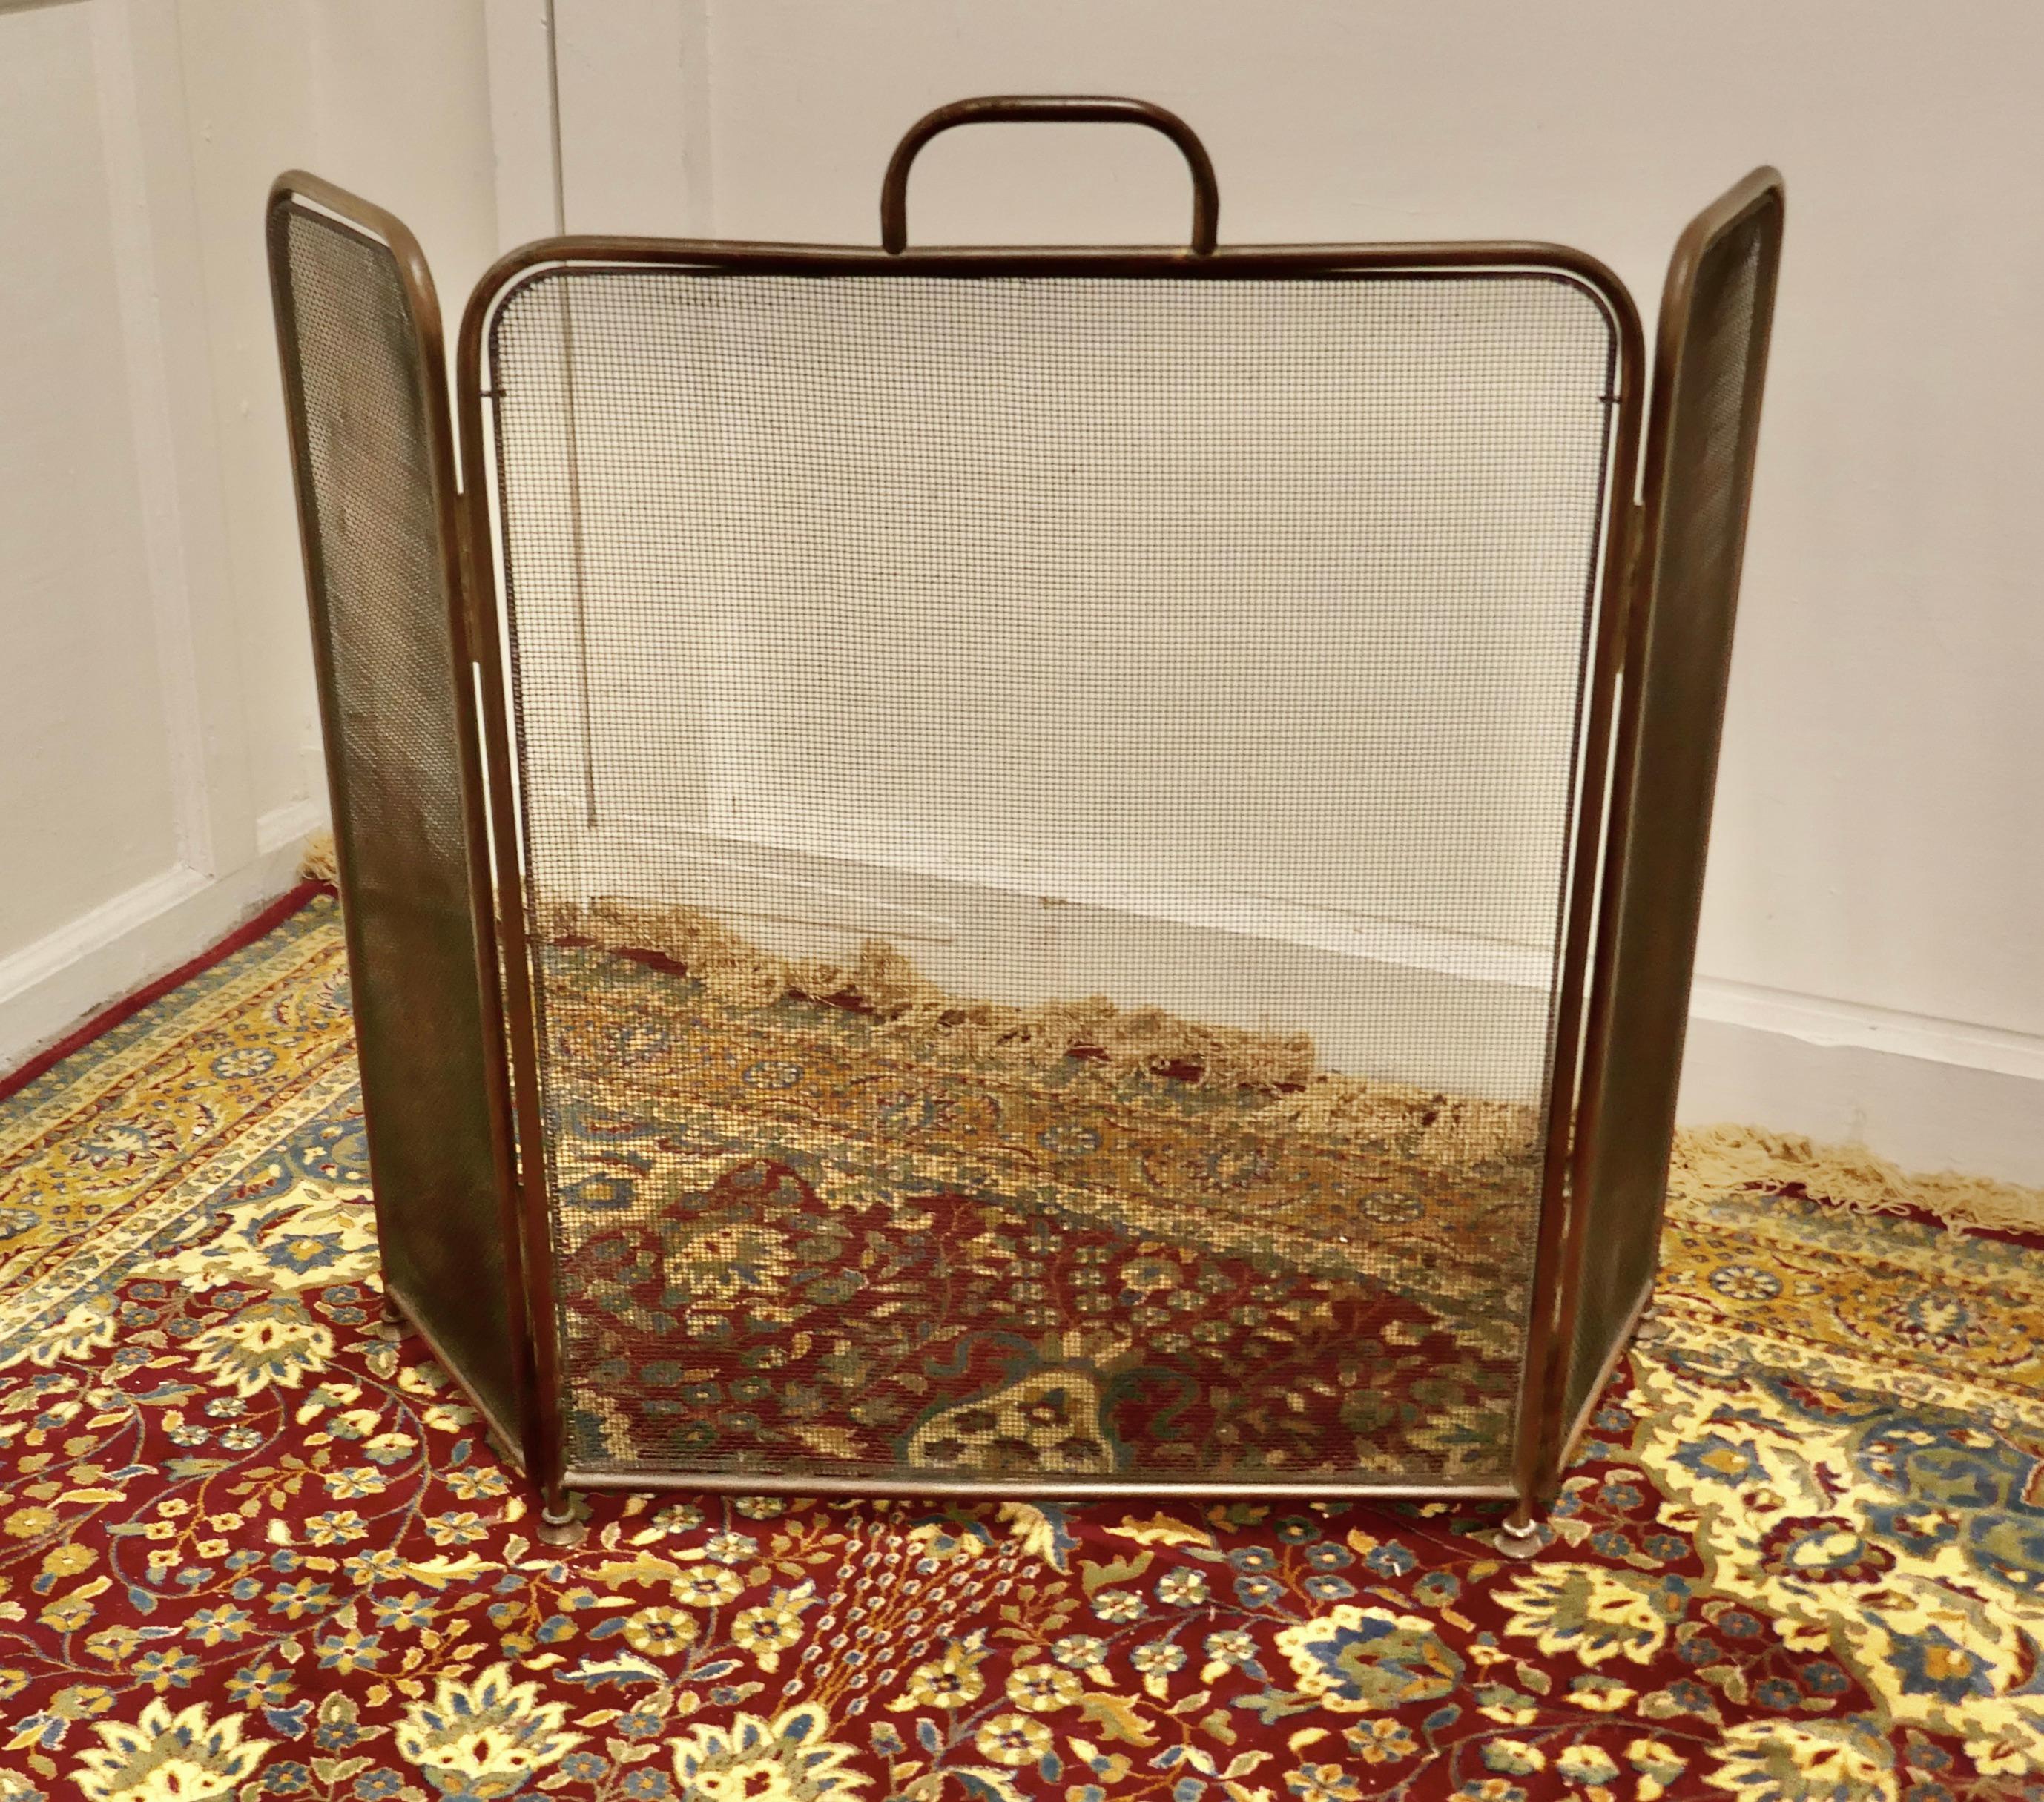 Large folding brass fire guard

This very useful spark guard has a brass frame and a fine mesh infill, it has the added advantage that it folds flat for storage, and when opened out it can be shaped to enclose your fire, very useful for a wood